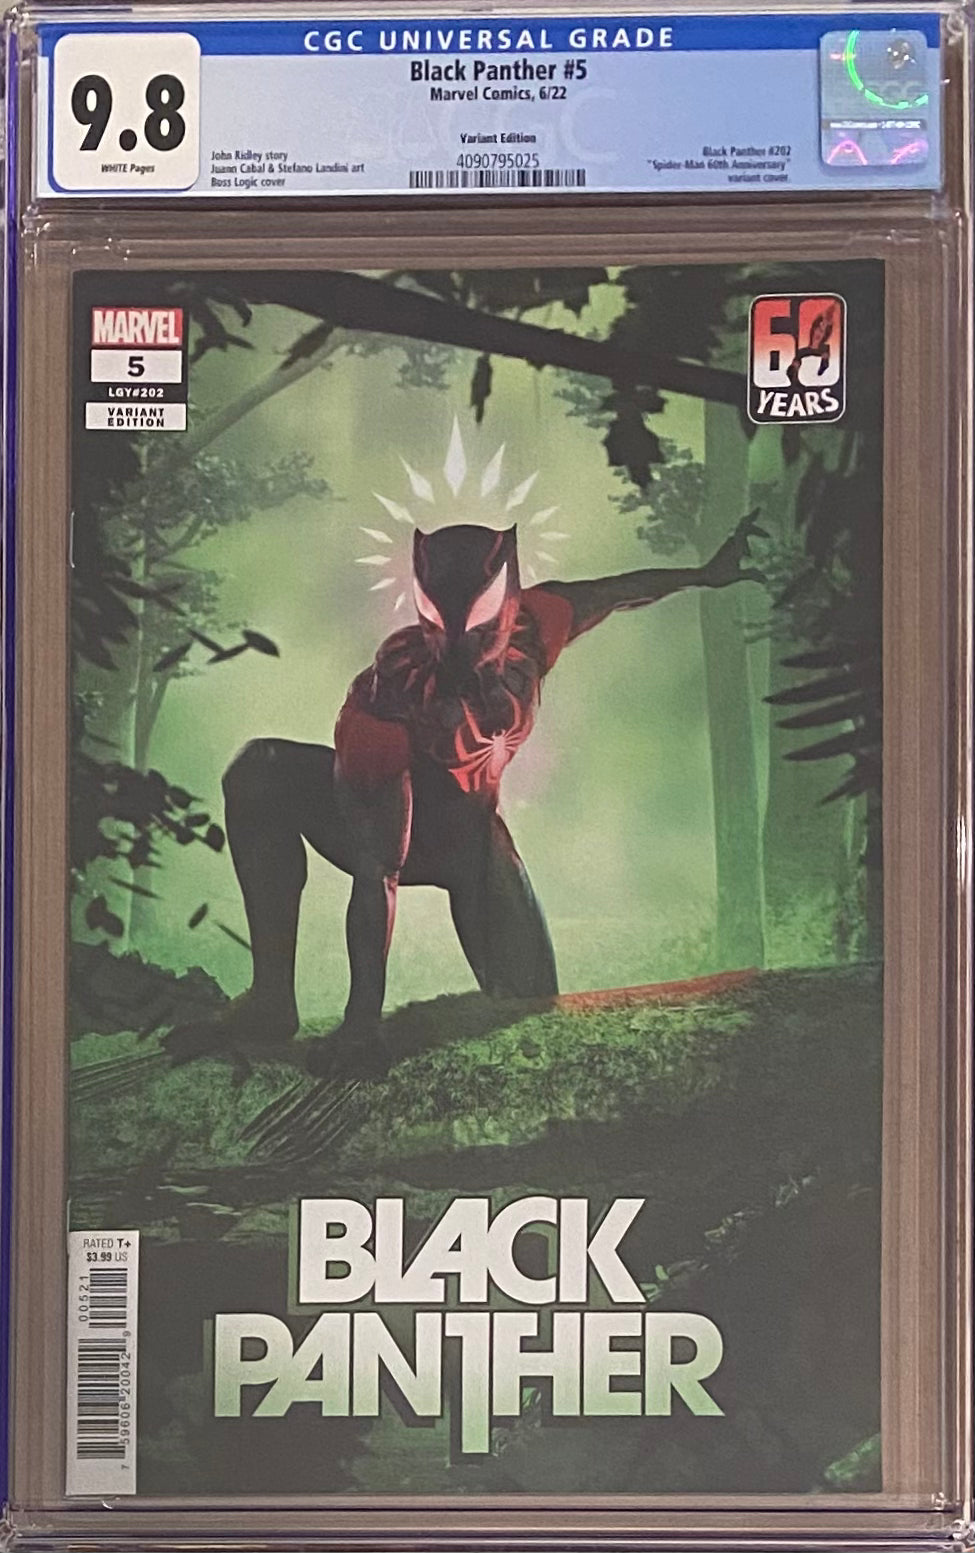 Black Panther #5 BossLogic Spider-Man Variant CGC 9.8 - Second Appearance Tosin